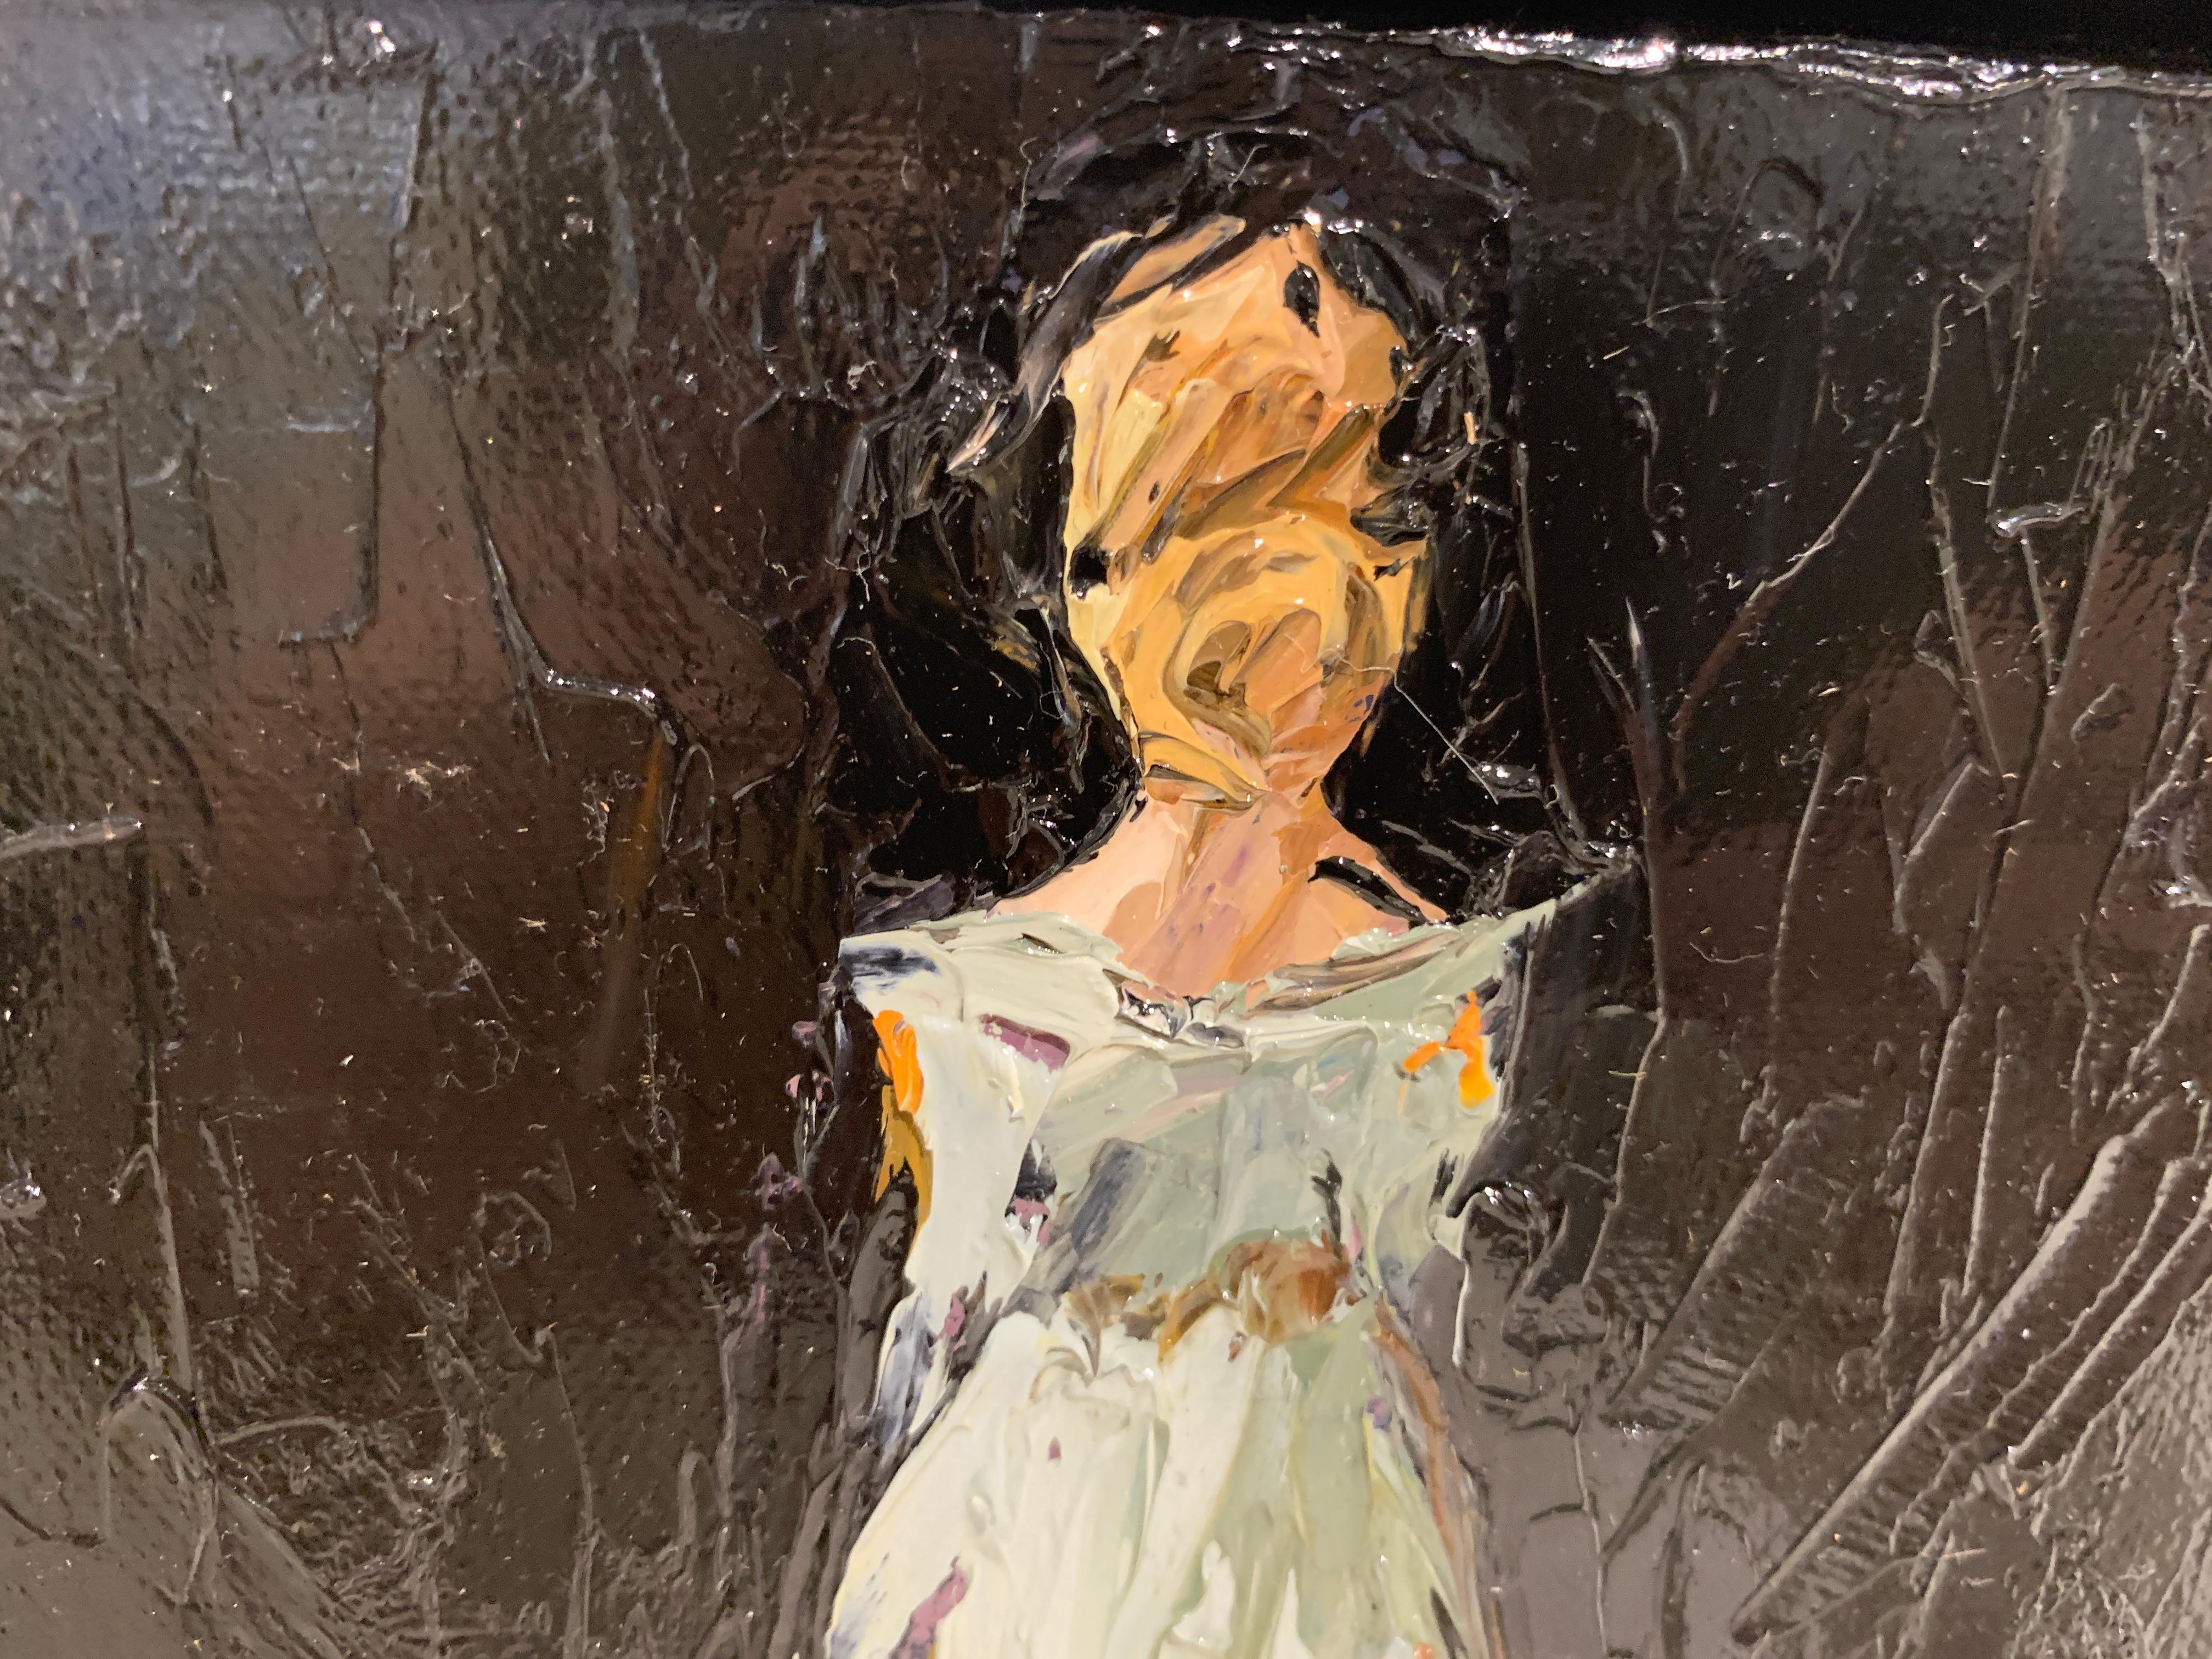 Petite Figure VI by American artist Geri Eubanks was painted in 2019.  Showing a woman facing away from us, dressed elegantly in a blue evening dress.  Her blond hair is done up in a bun, probably in preparation for a night out on the town.  The